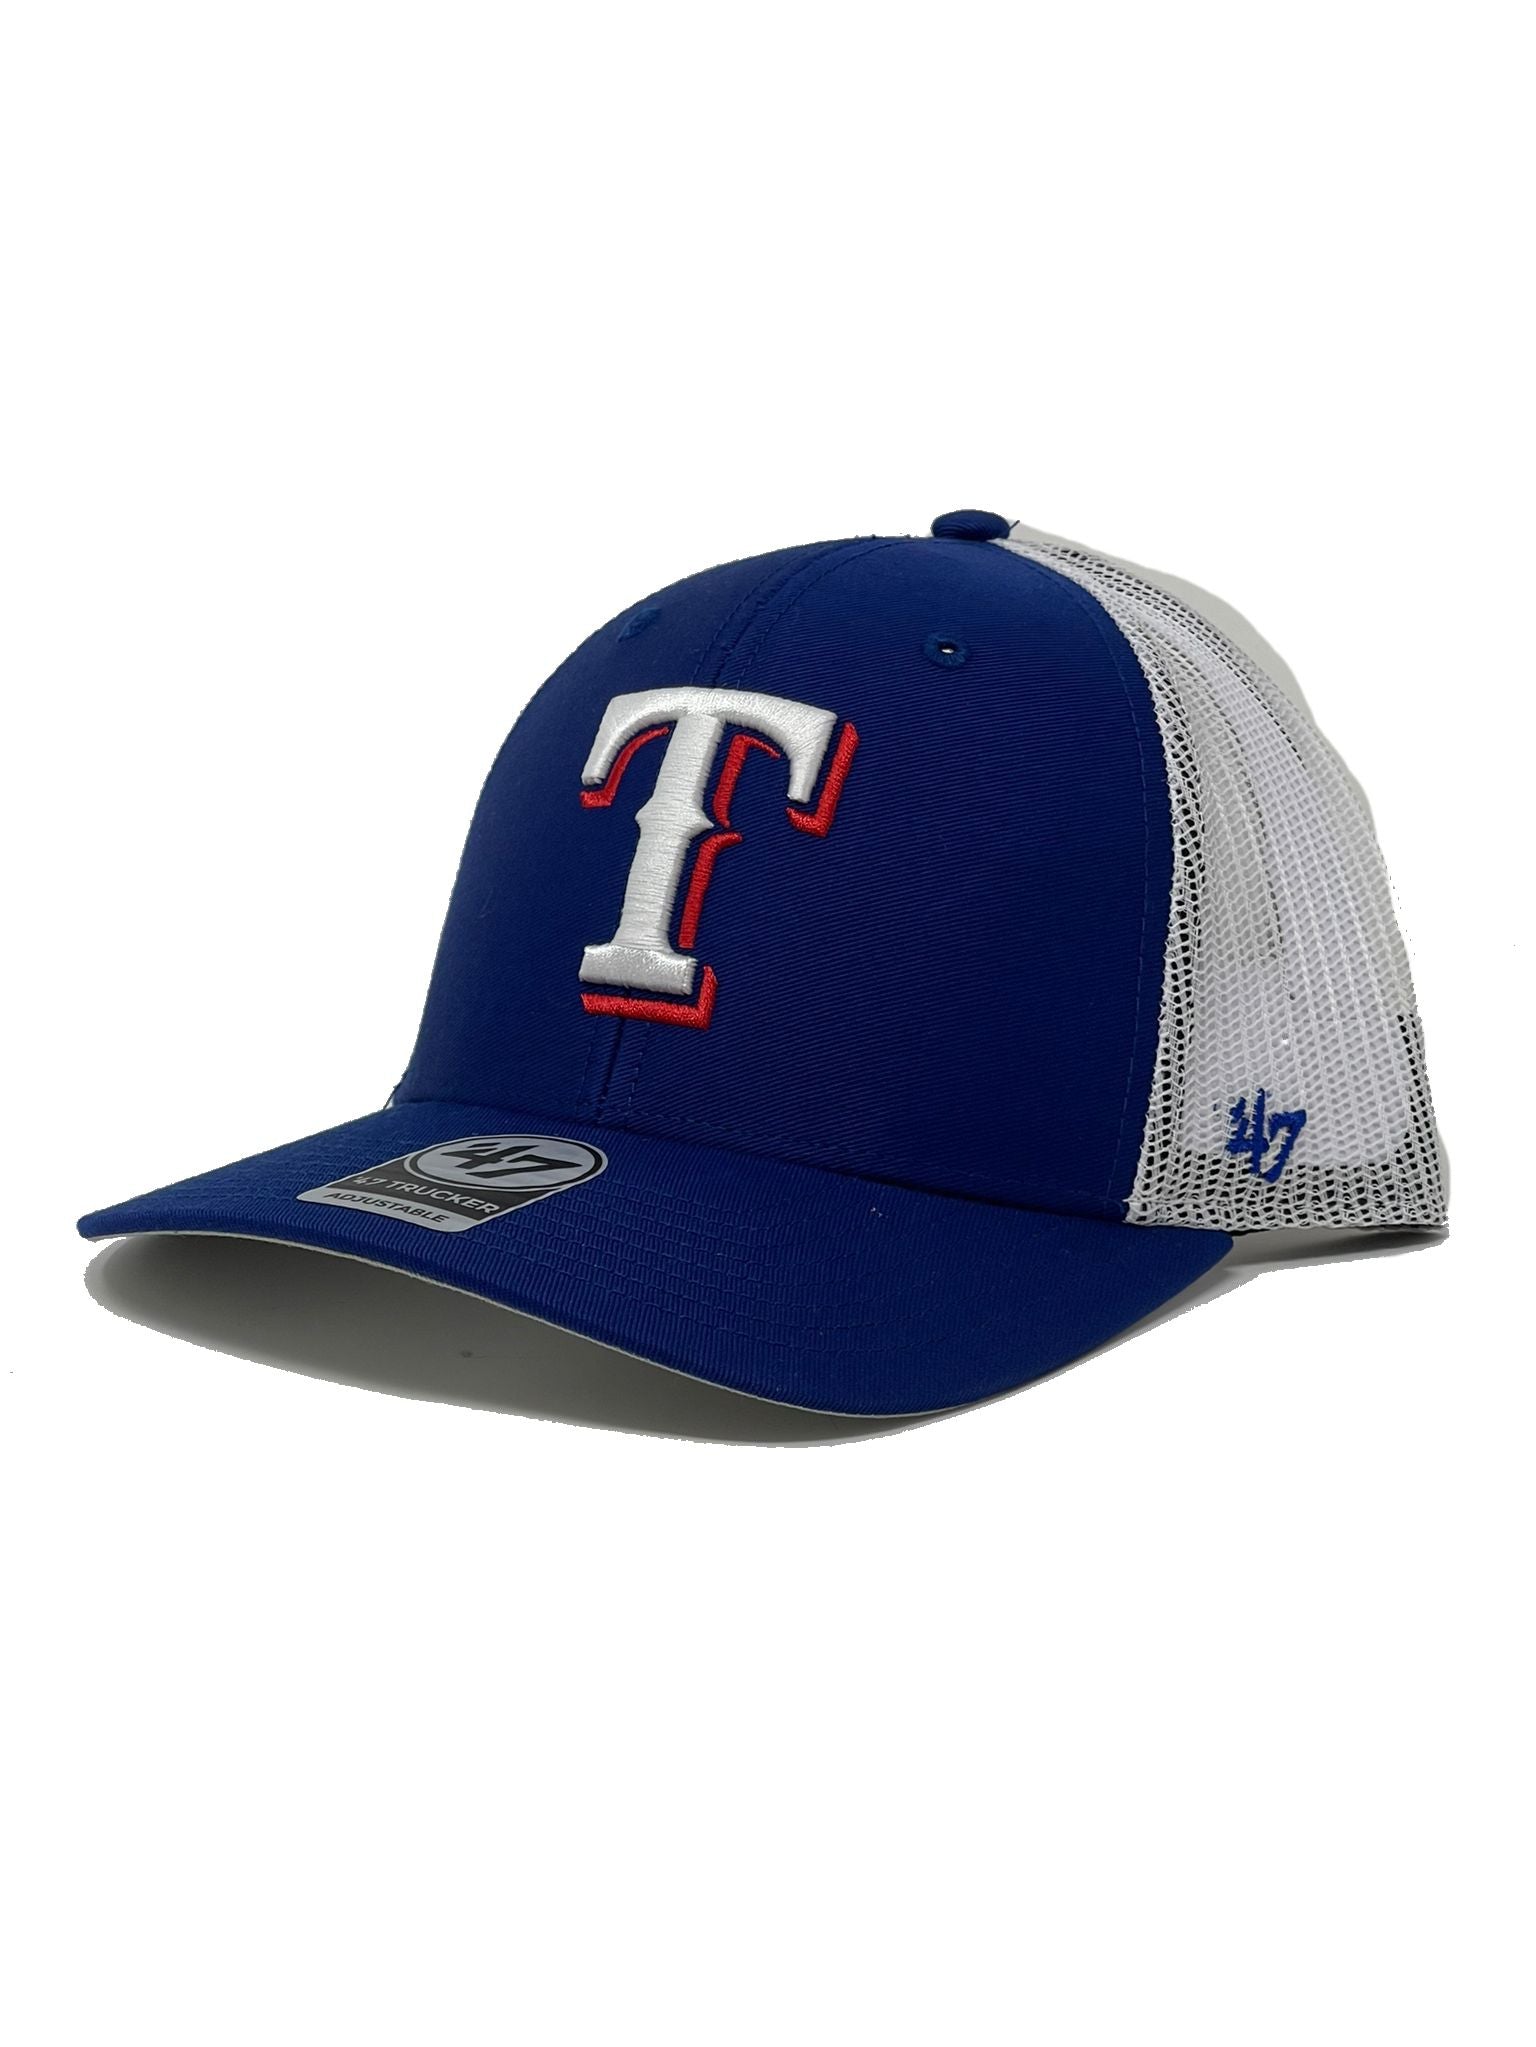 Texas Rangers MLB '47 MVP Cooperstown Solid Blue Hat Cap Adult Men's A –  East American Sports LLC